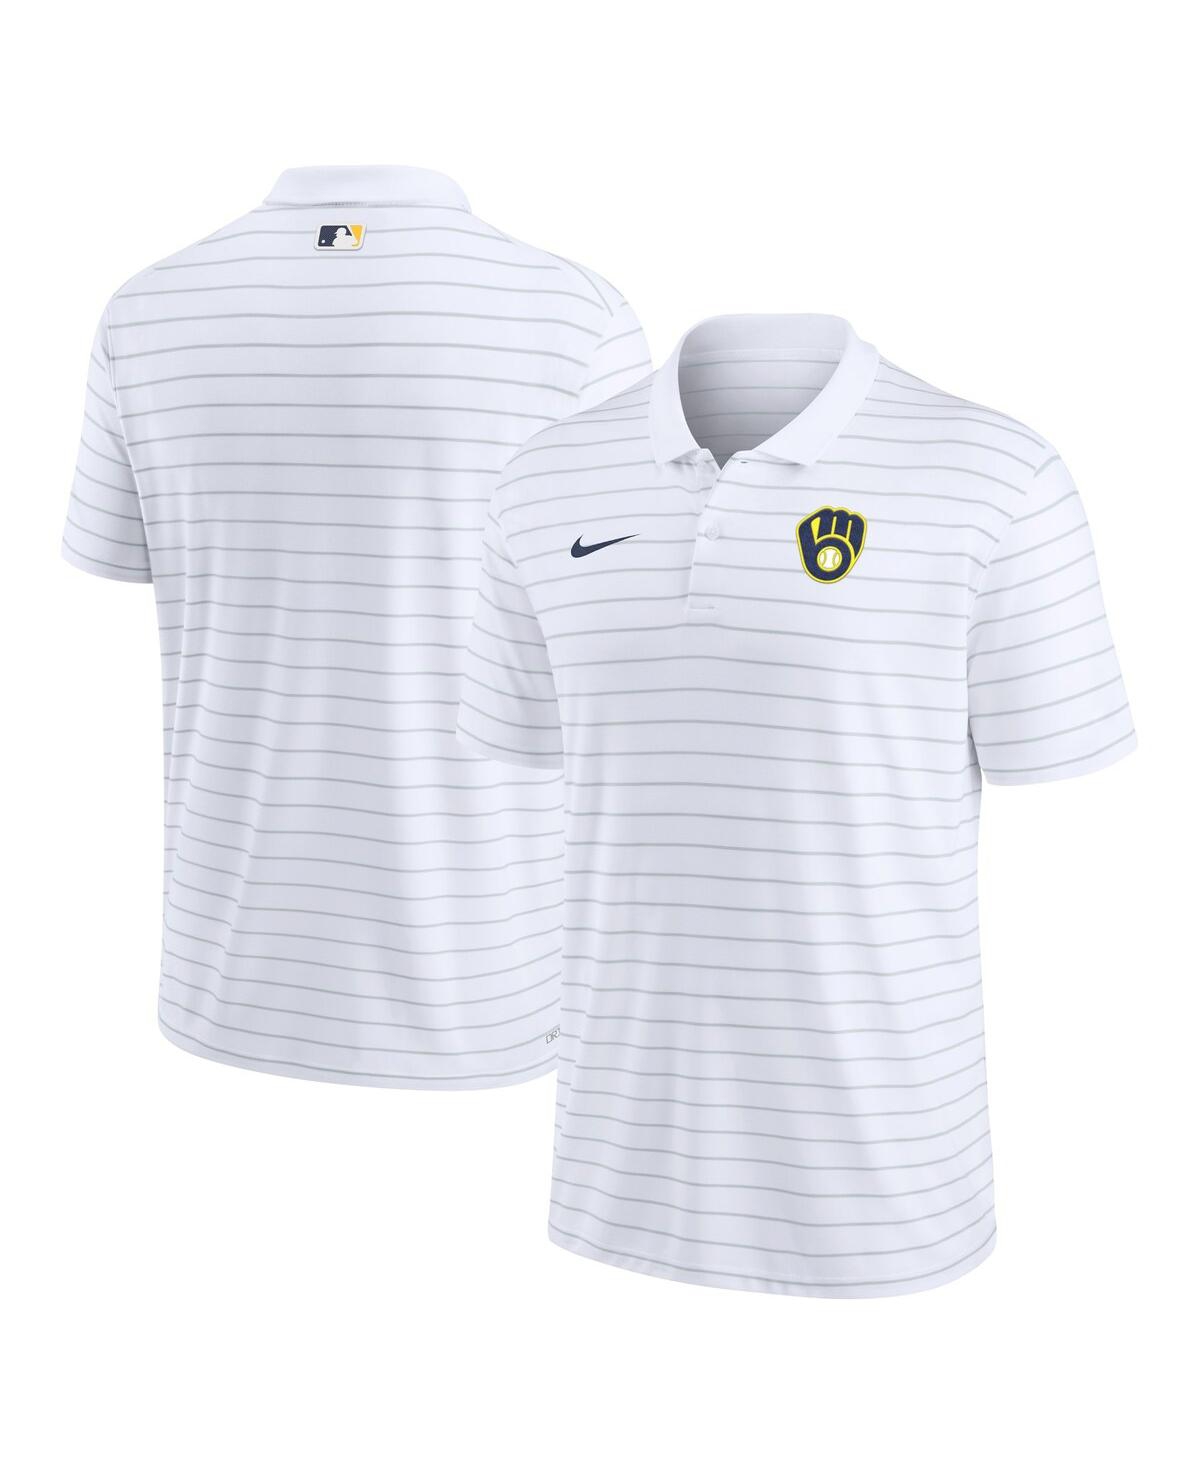 Men's Nike White Milwaukee Brewers Authentic Collection Victory Striped Performance Polo Shirt - White